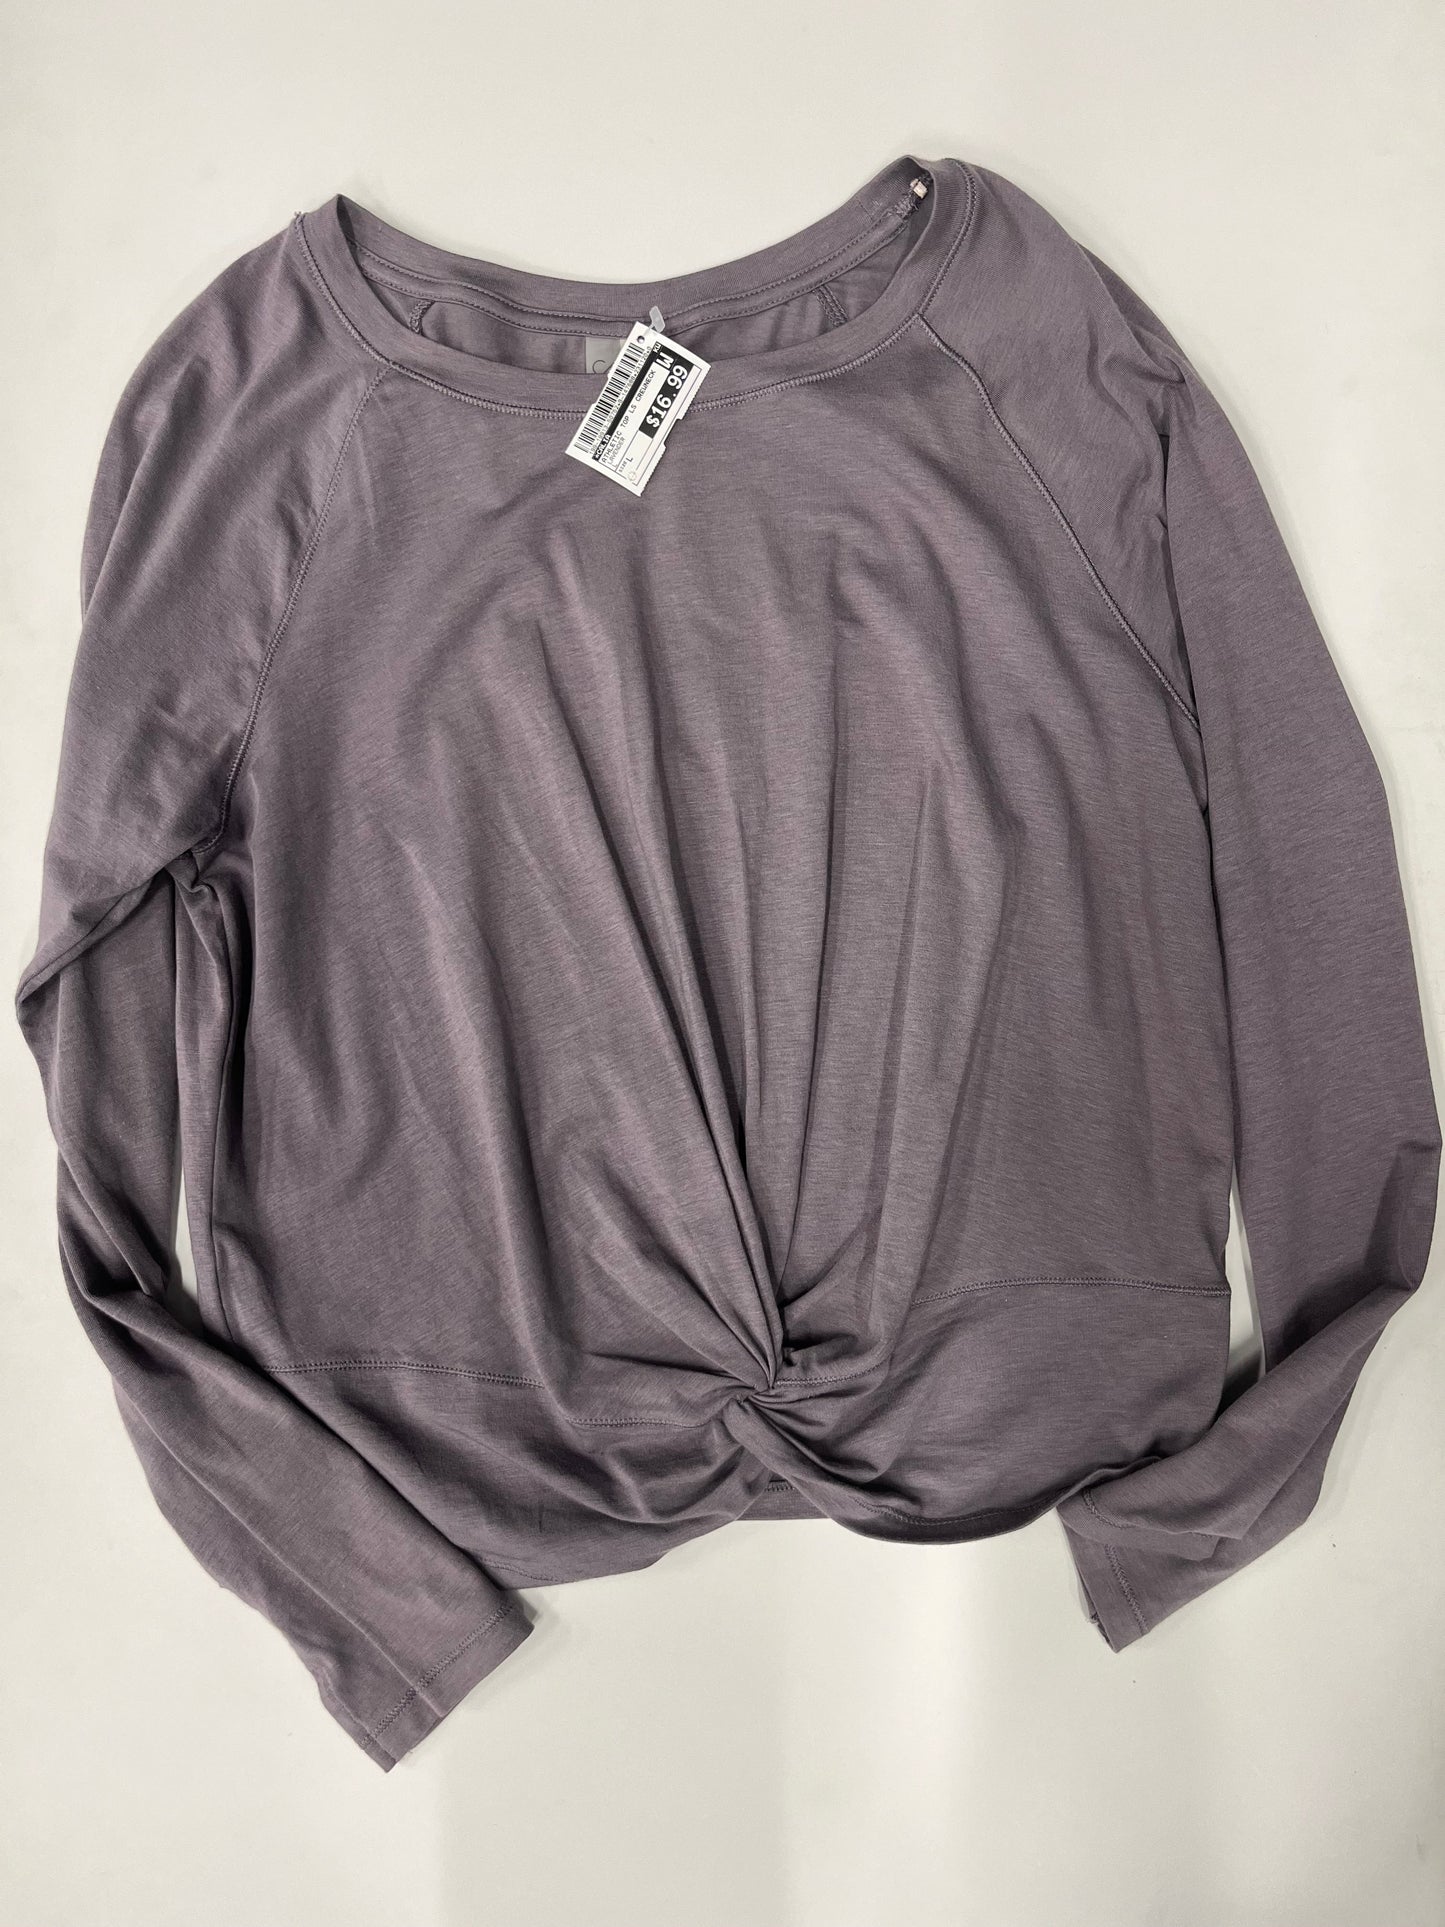 Athletic Top Long Sleeve Crewneck By Calia  Size: L